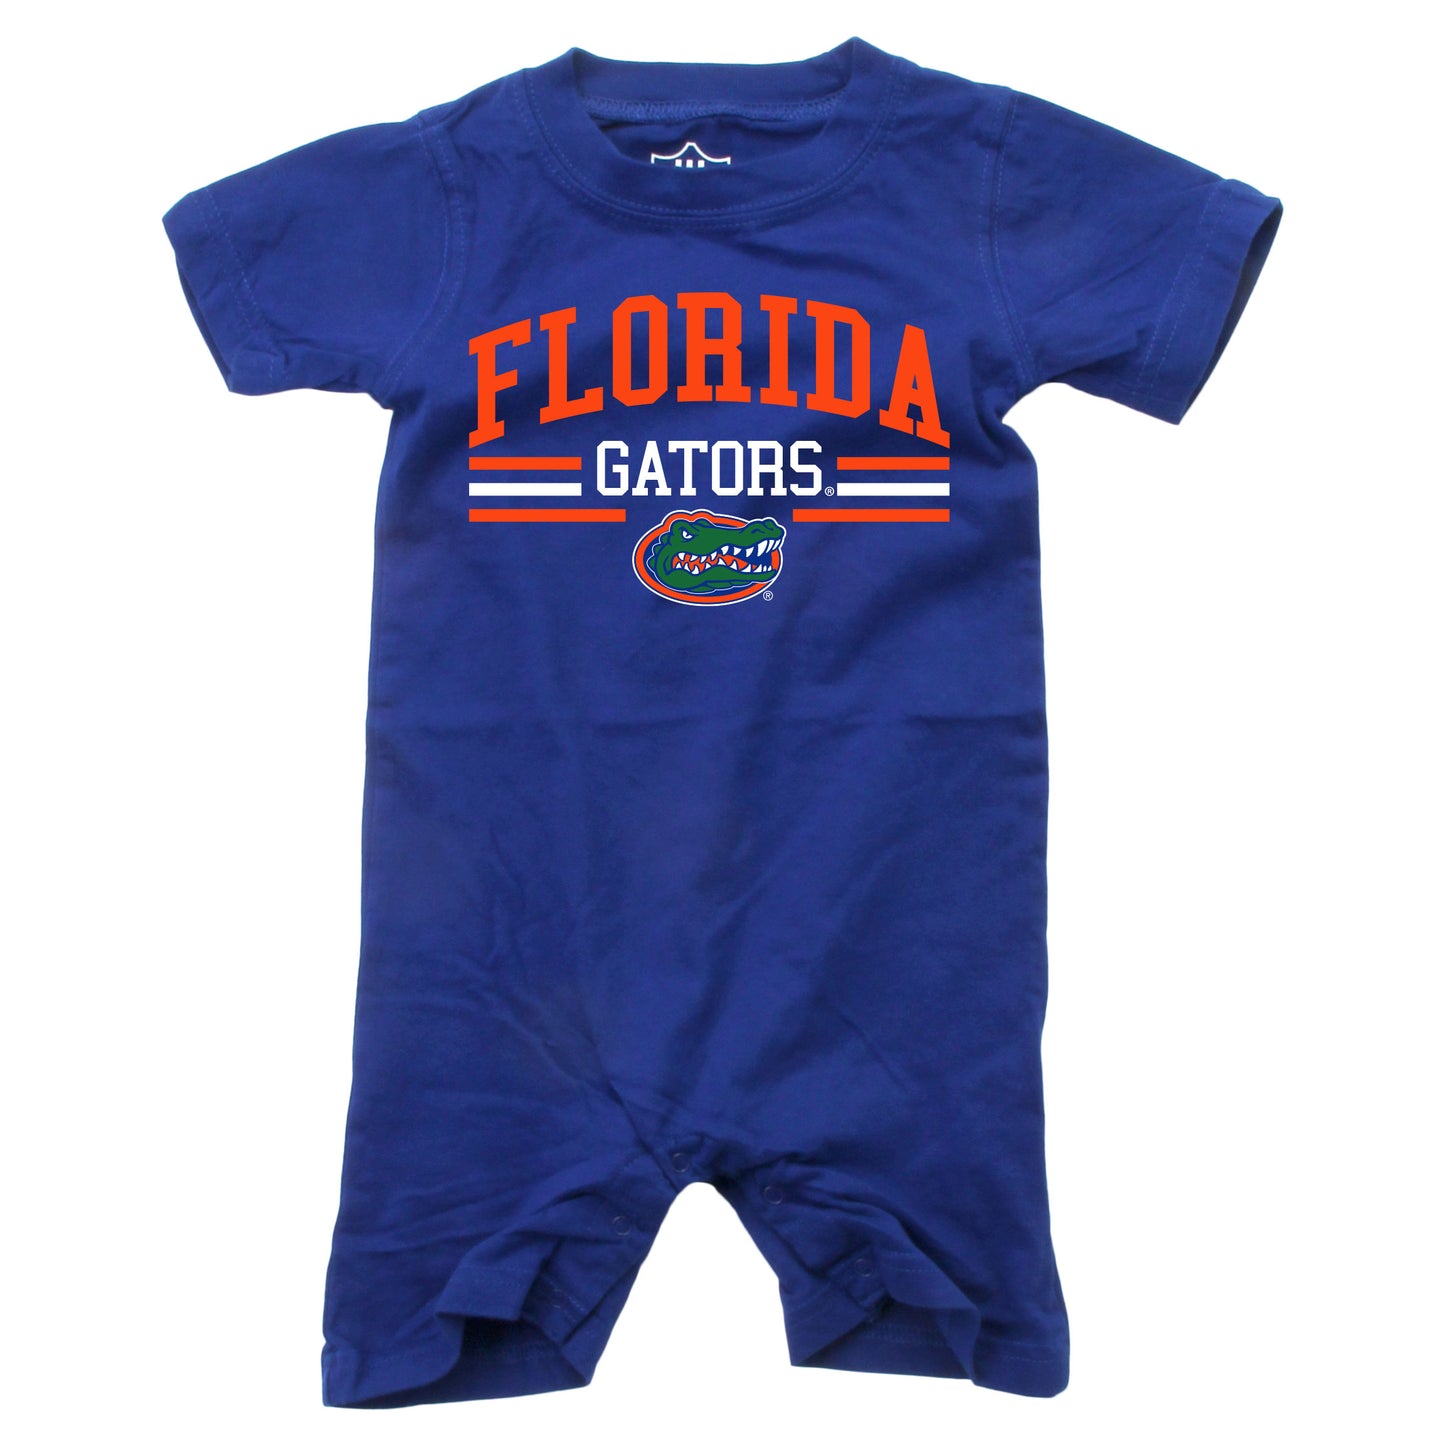 Florida Gators Wes and Willy Baby College Team Shorts Romper